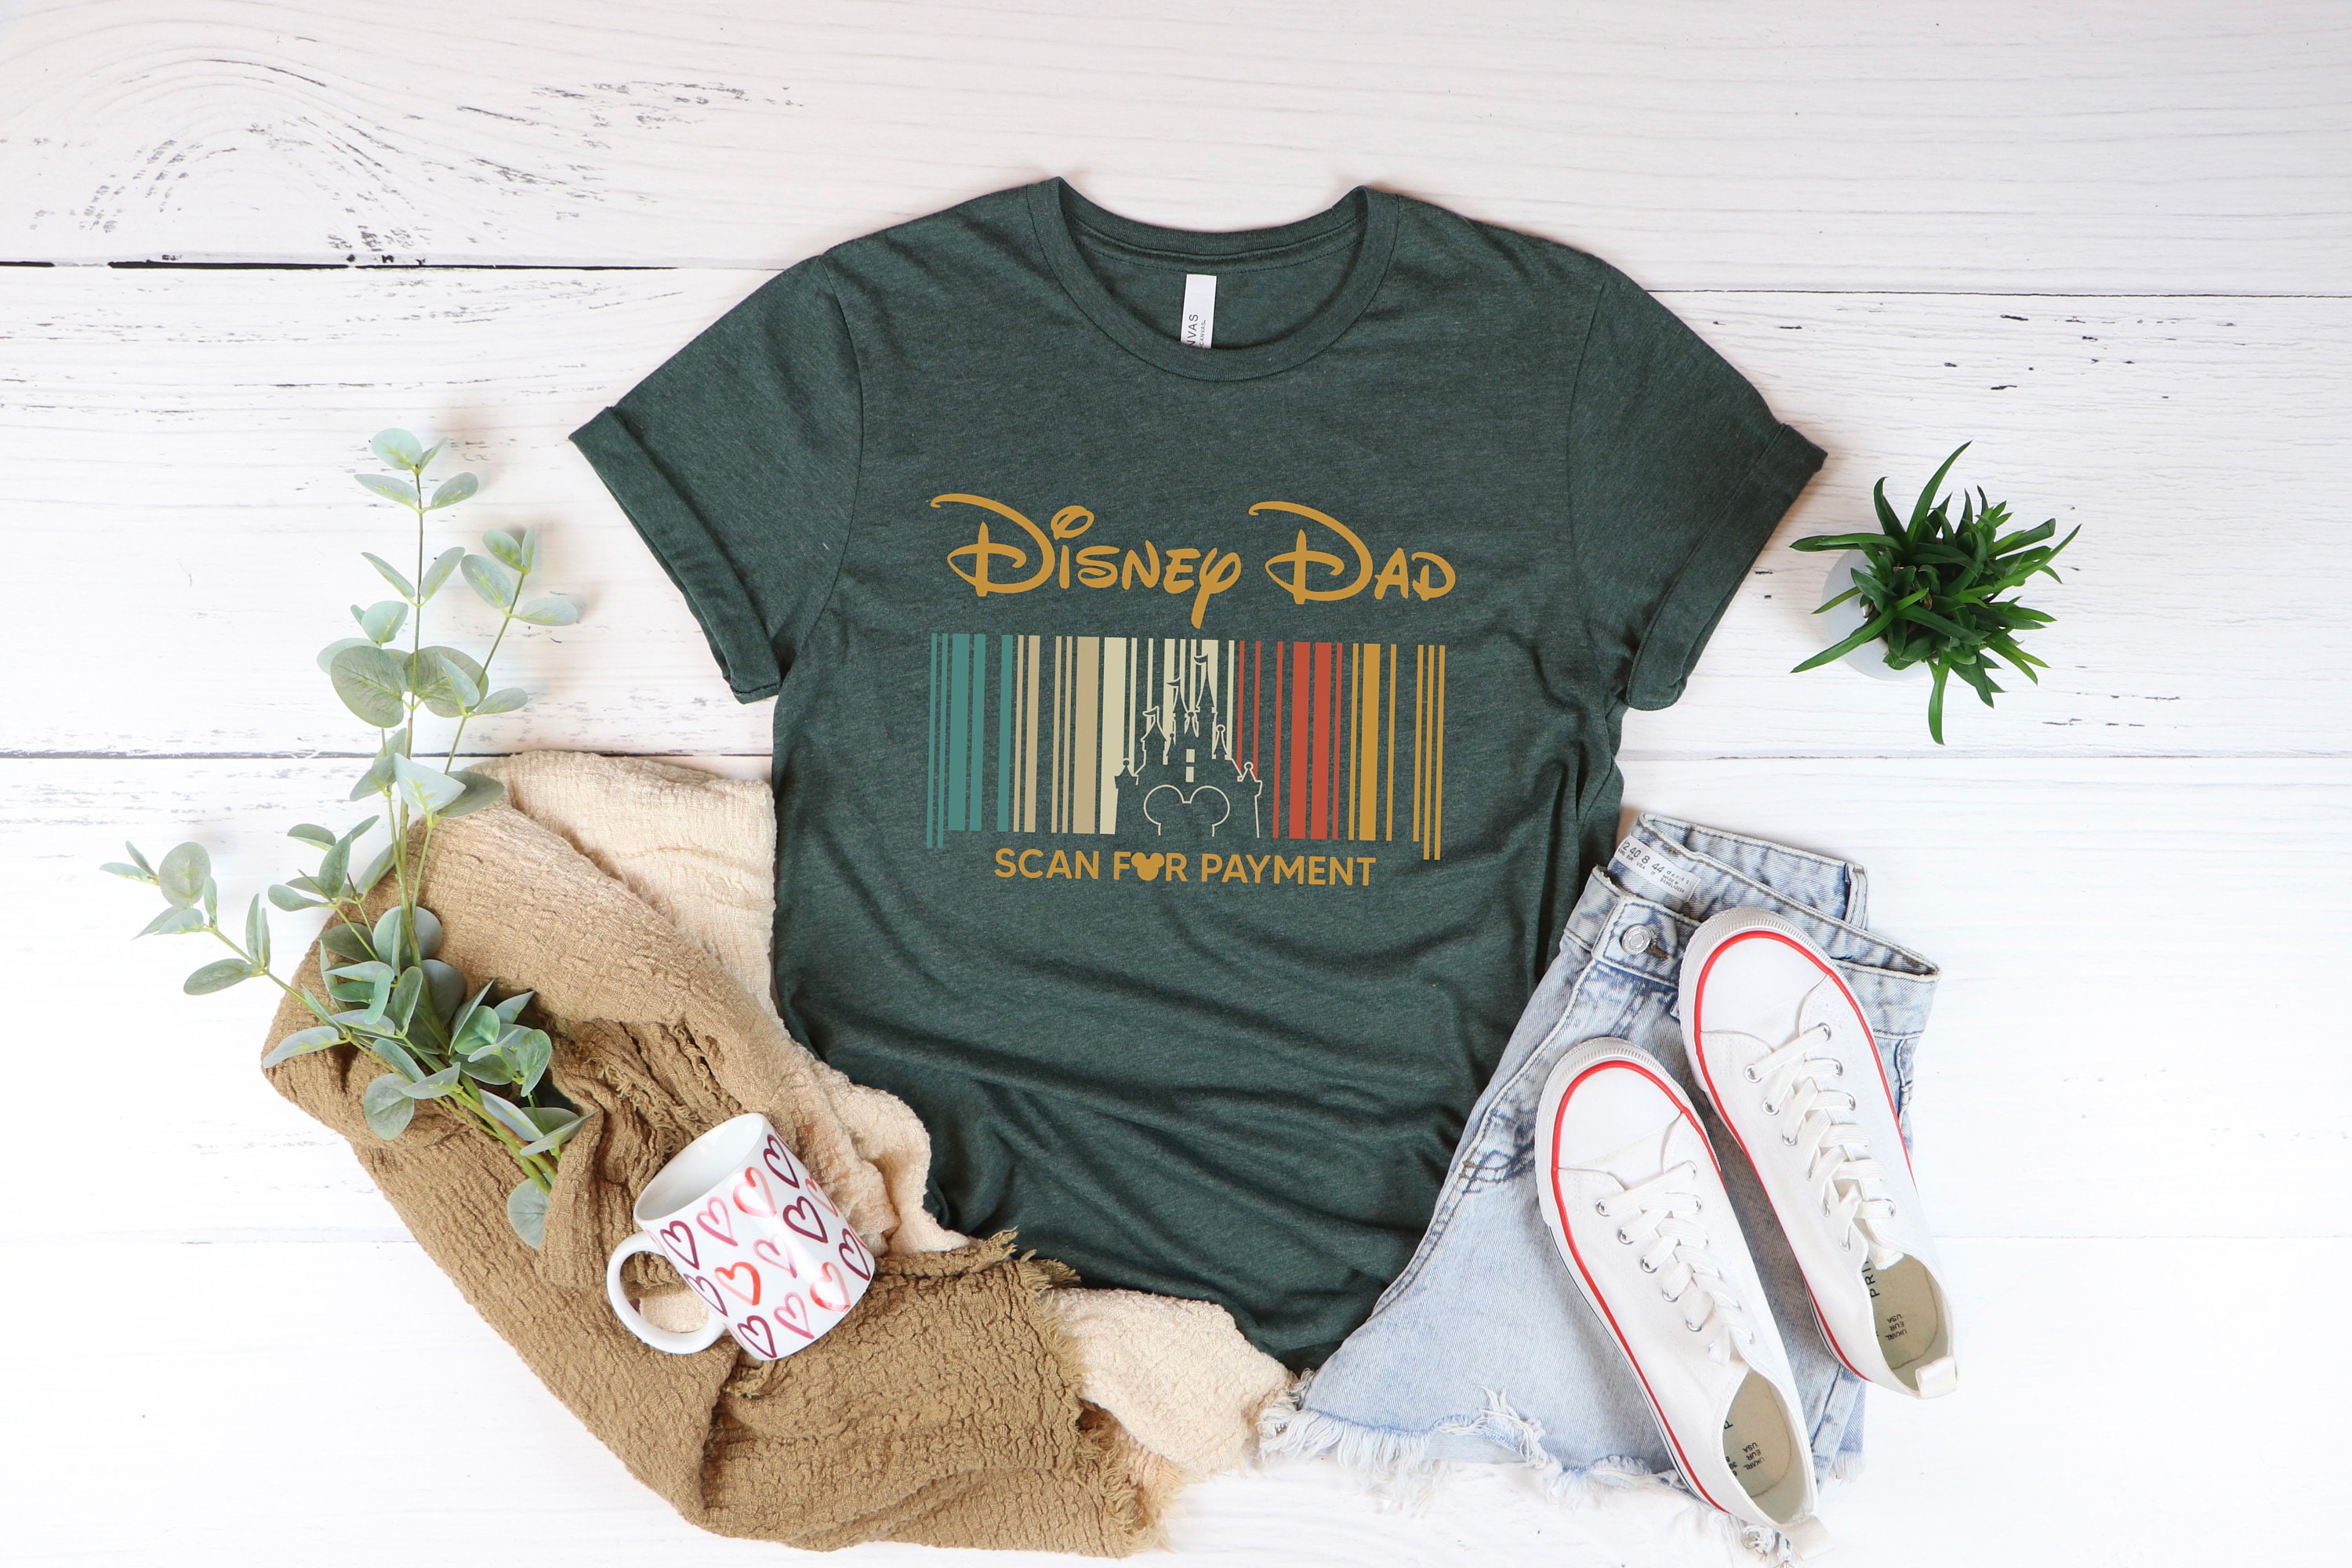 Discover Disney Dad Scan For Payment - Mouse Theme Park Shirt